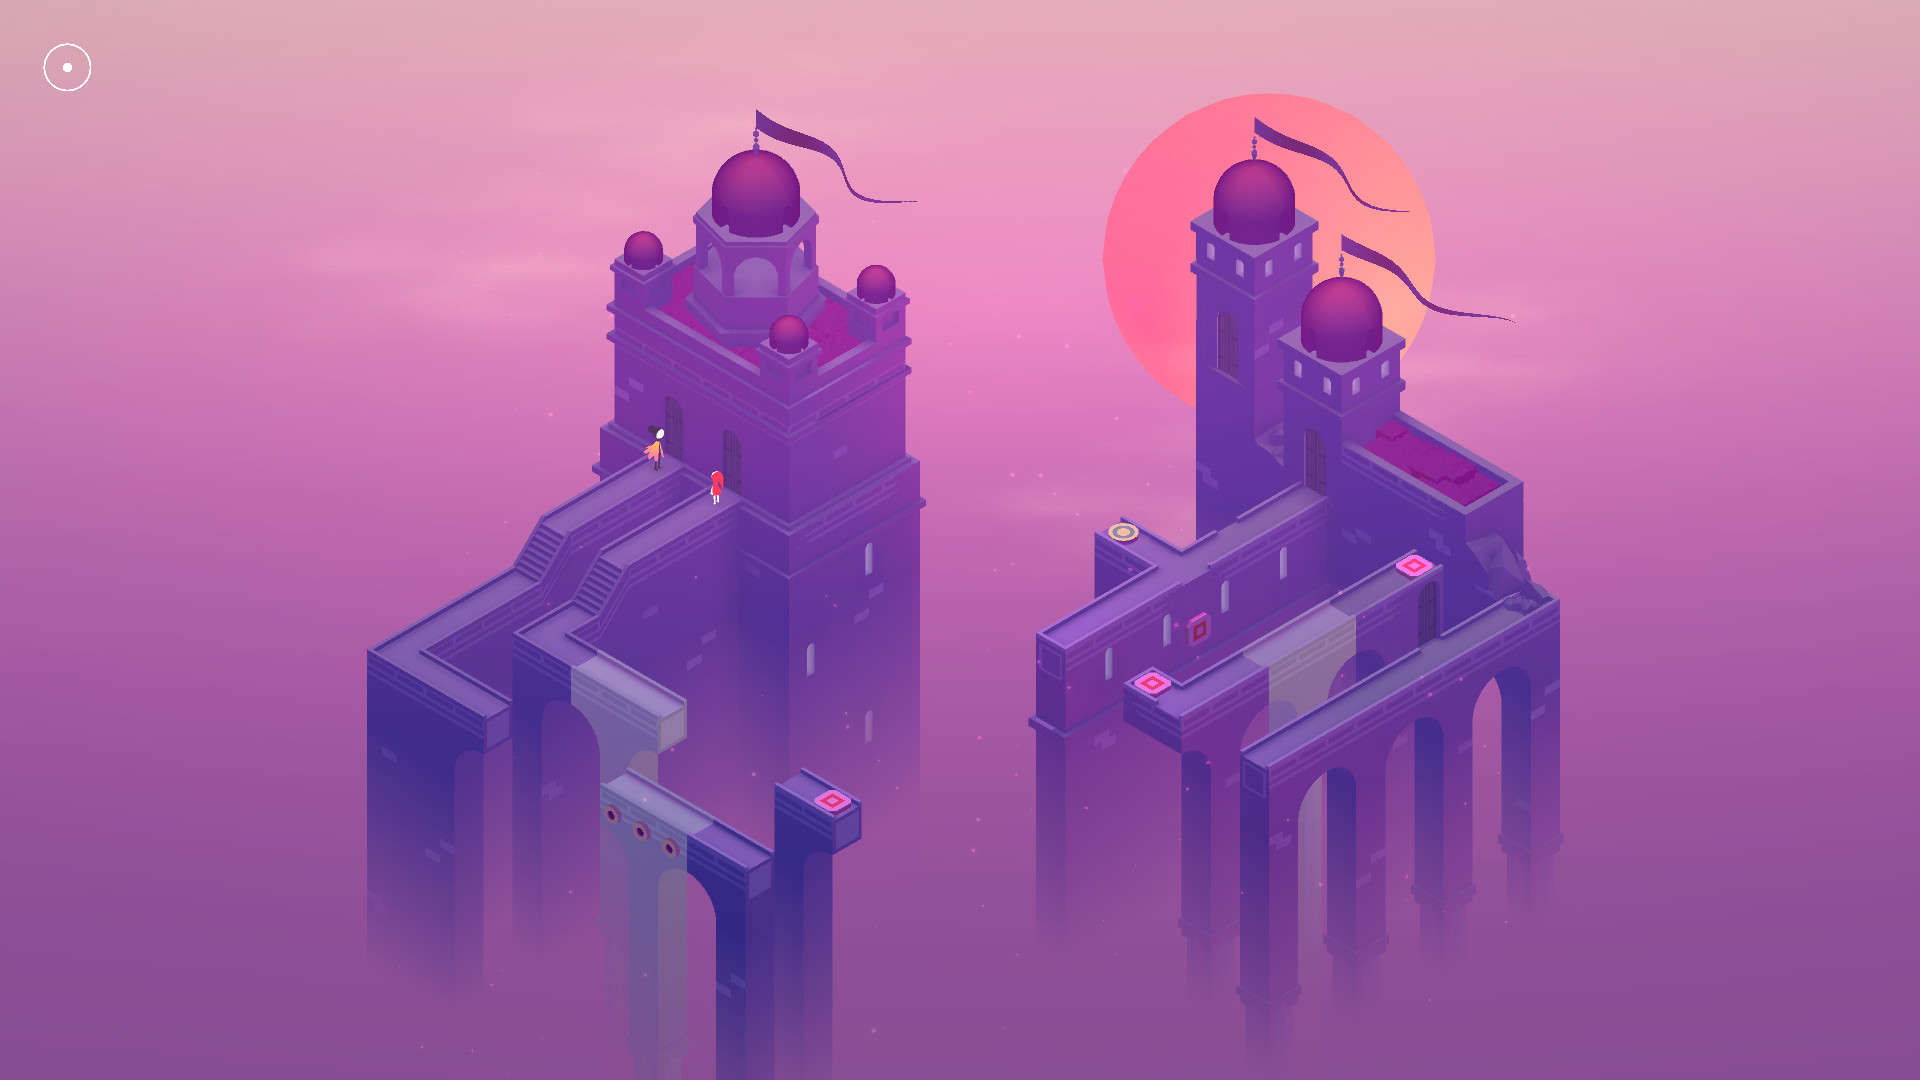 A Steam promotional image for Monument Valley 2.